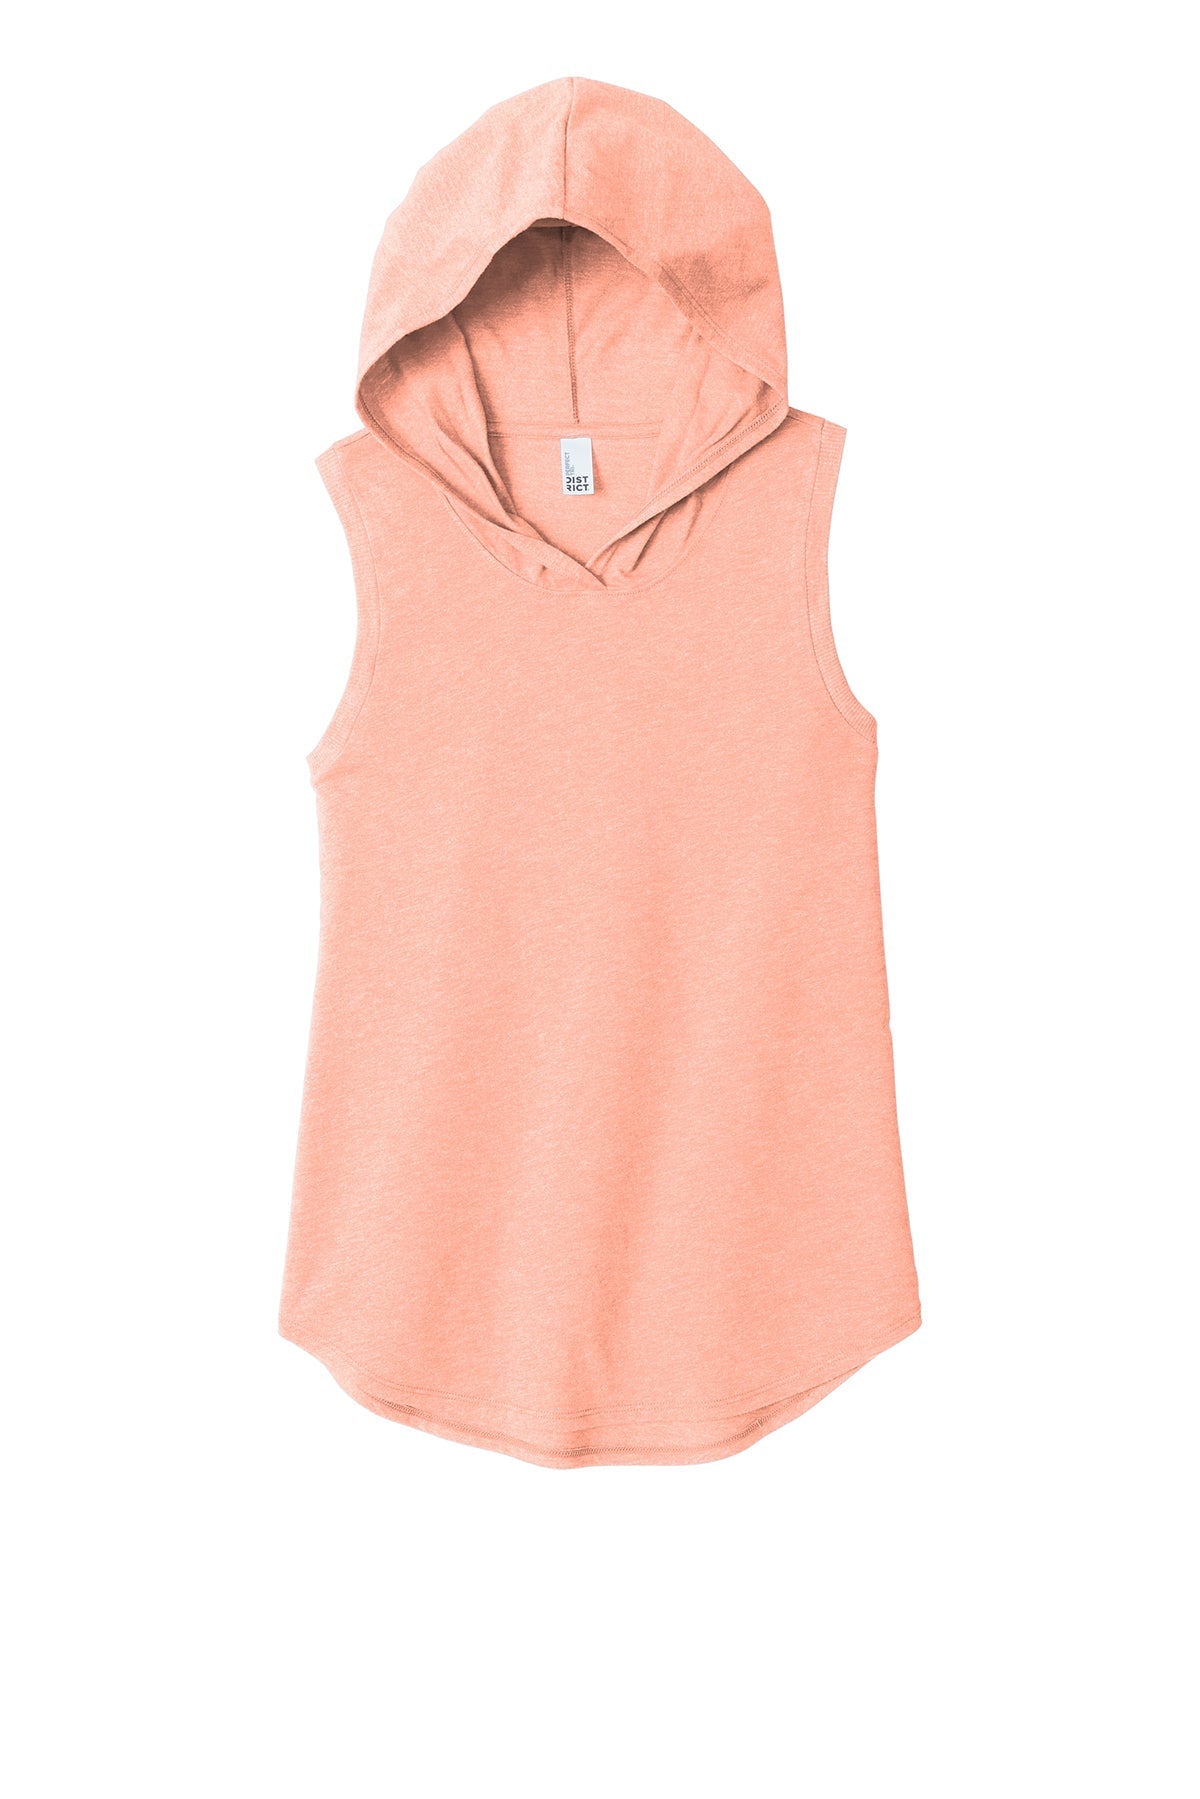 DT1375 District ® Women’s Perfect Tri ® Sleeveless Hoodie